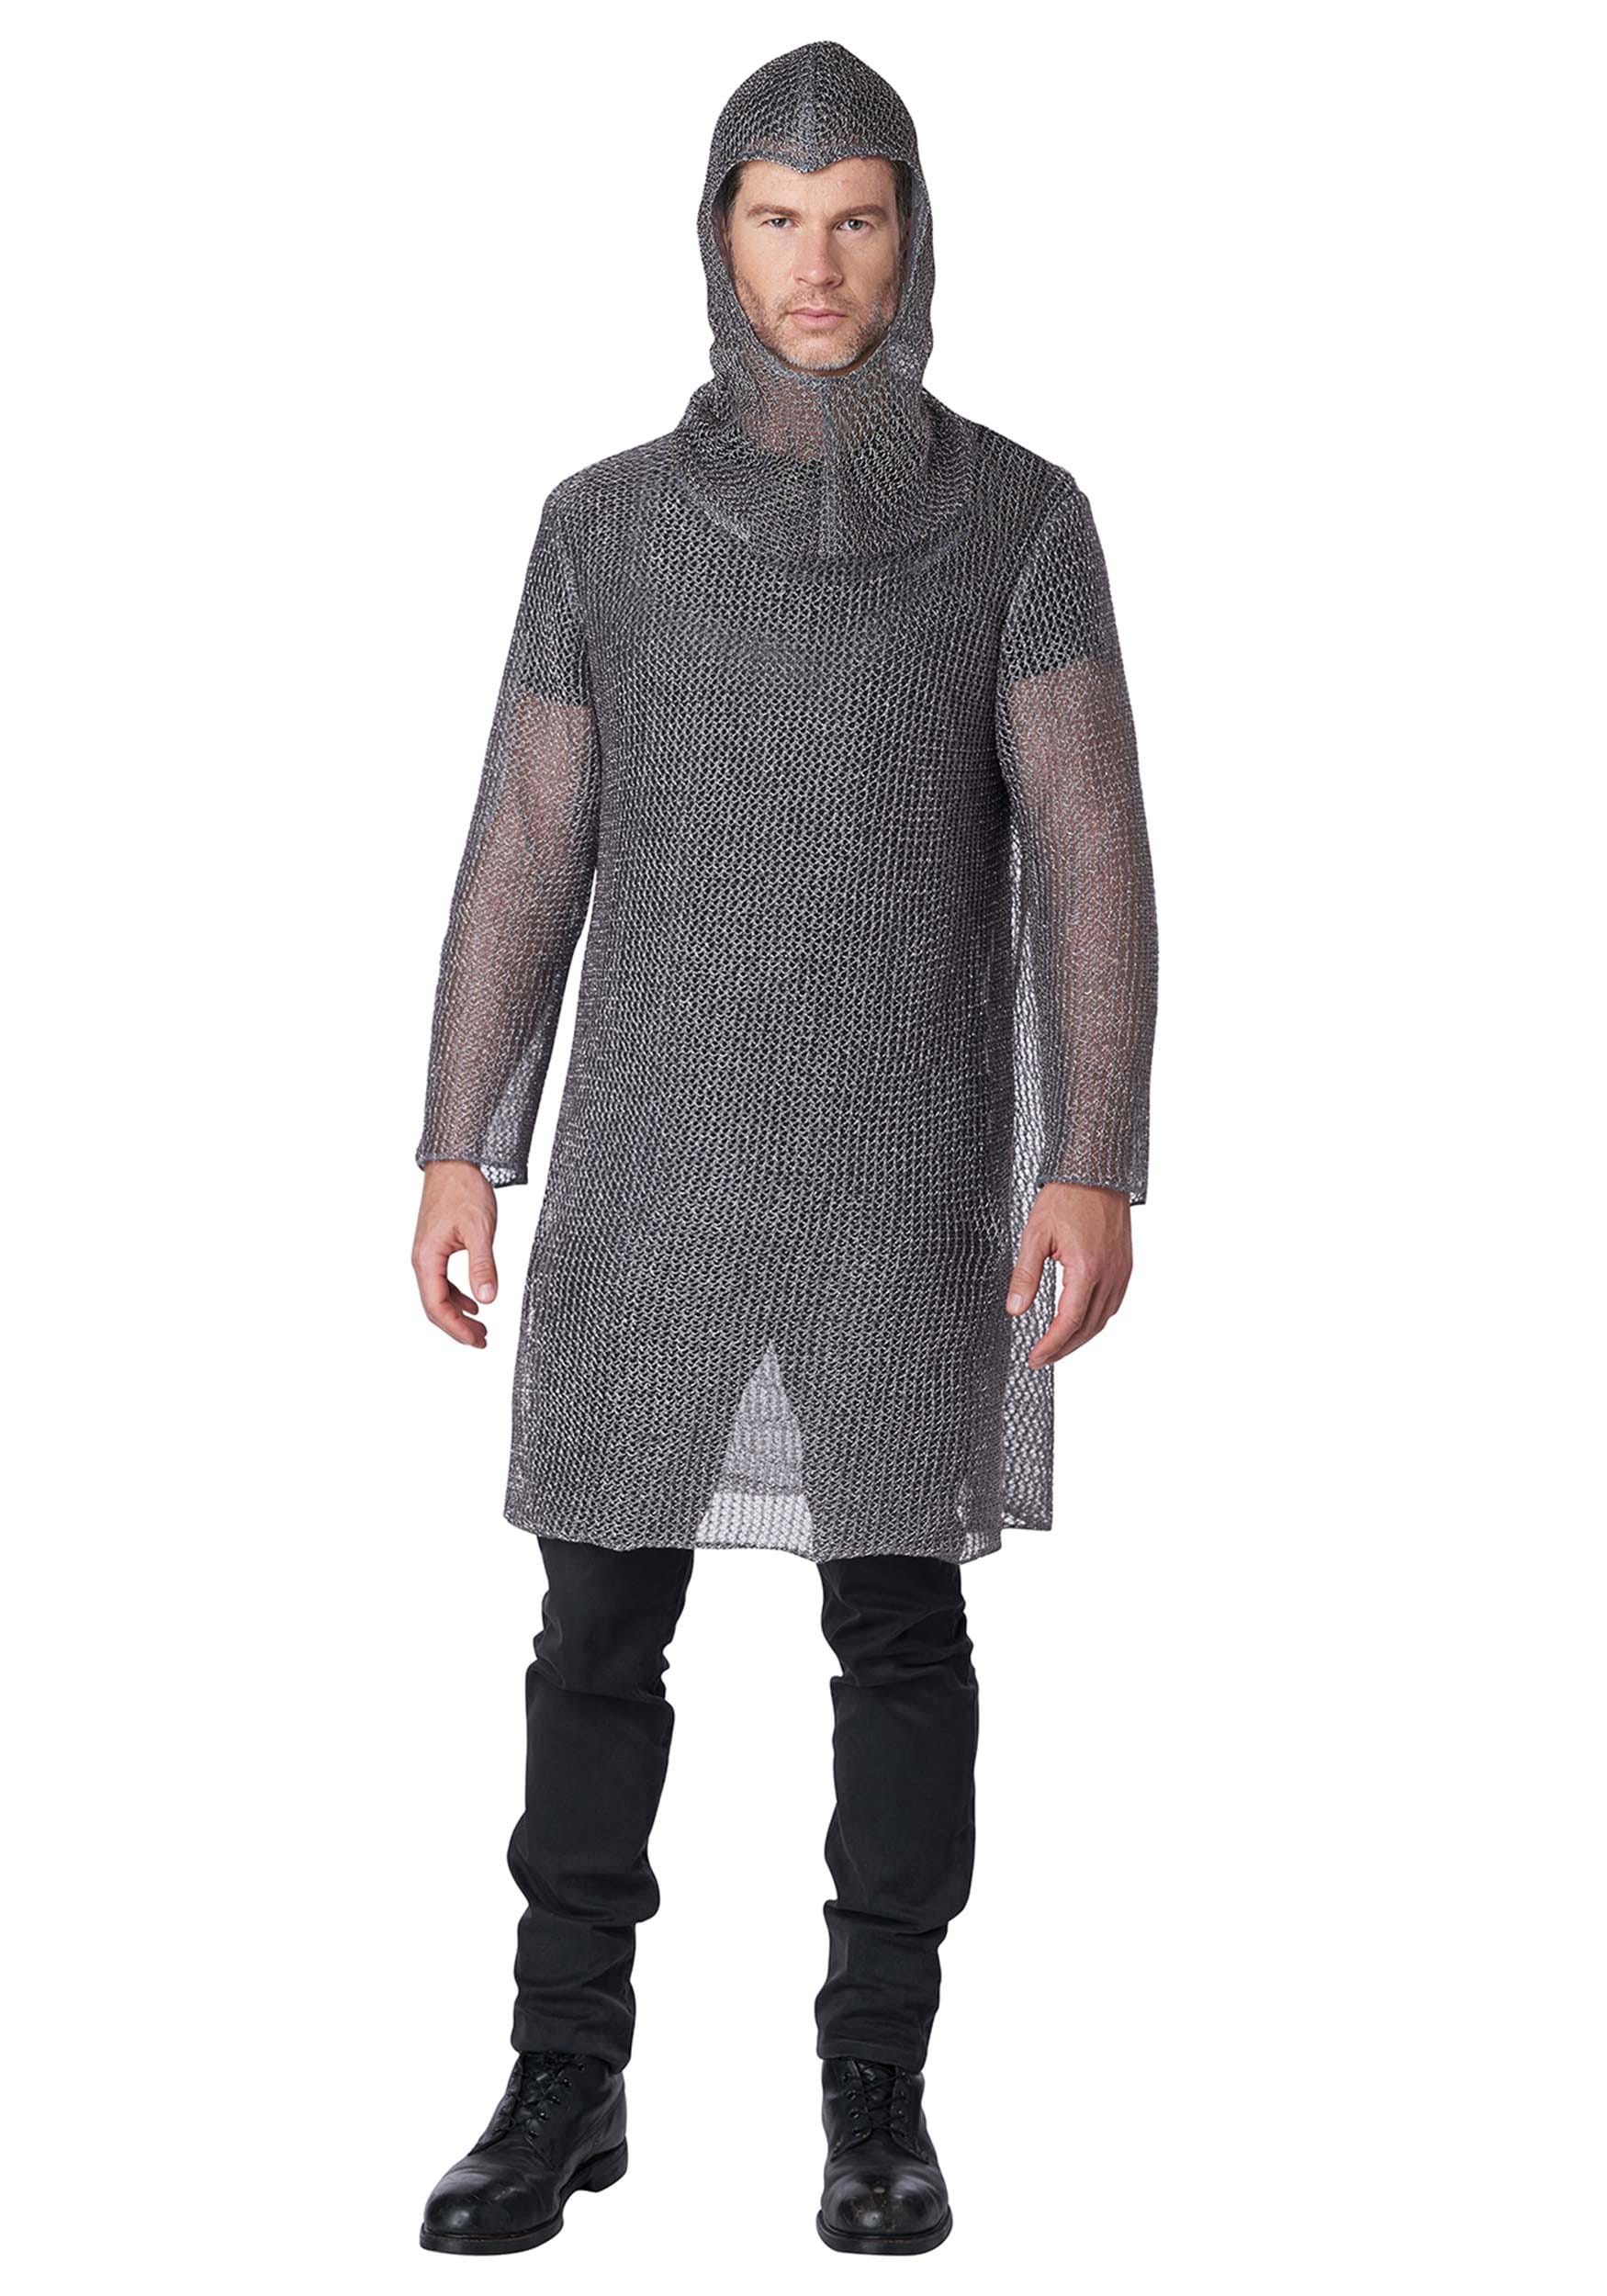 Metallic Knit Chainmail Tunic & Cowl Adult Costume